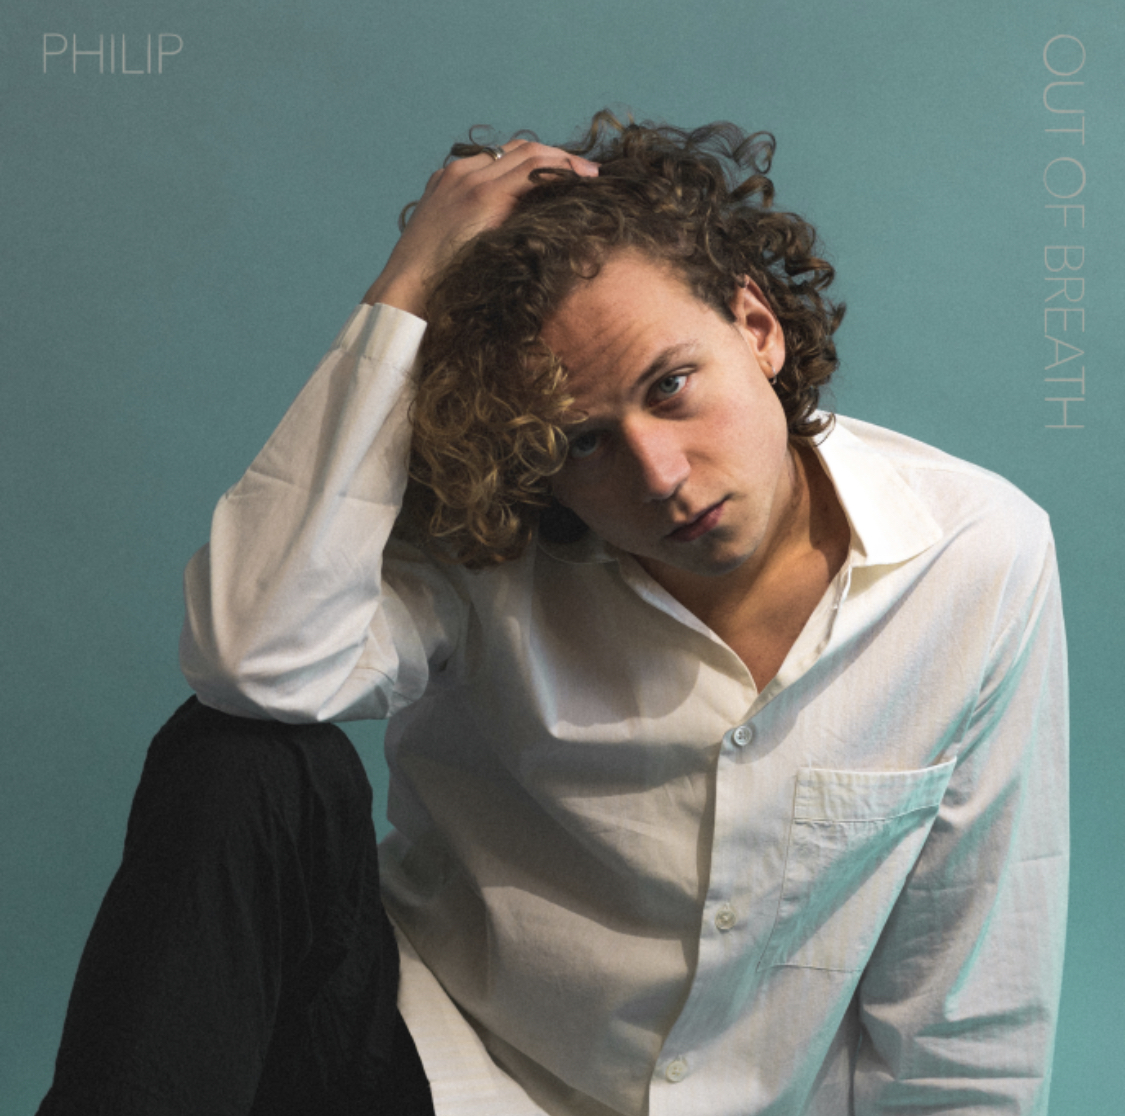 Dubbed a ‘Burnout Anthem’, the debut single Out of Breath by Philip Bæk Hedegaard which is a  “burnout-anthem” and deals with themes like overthinking and fear